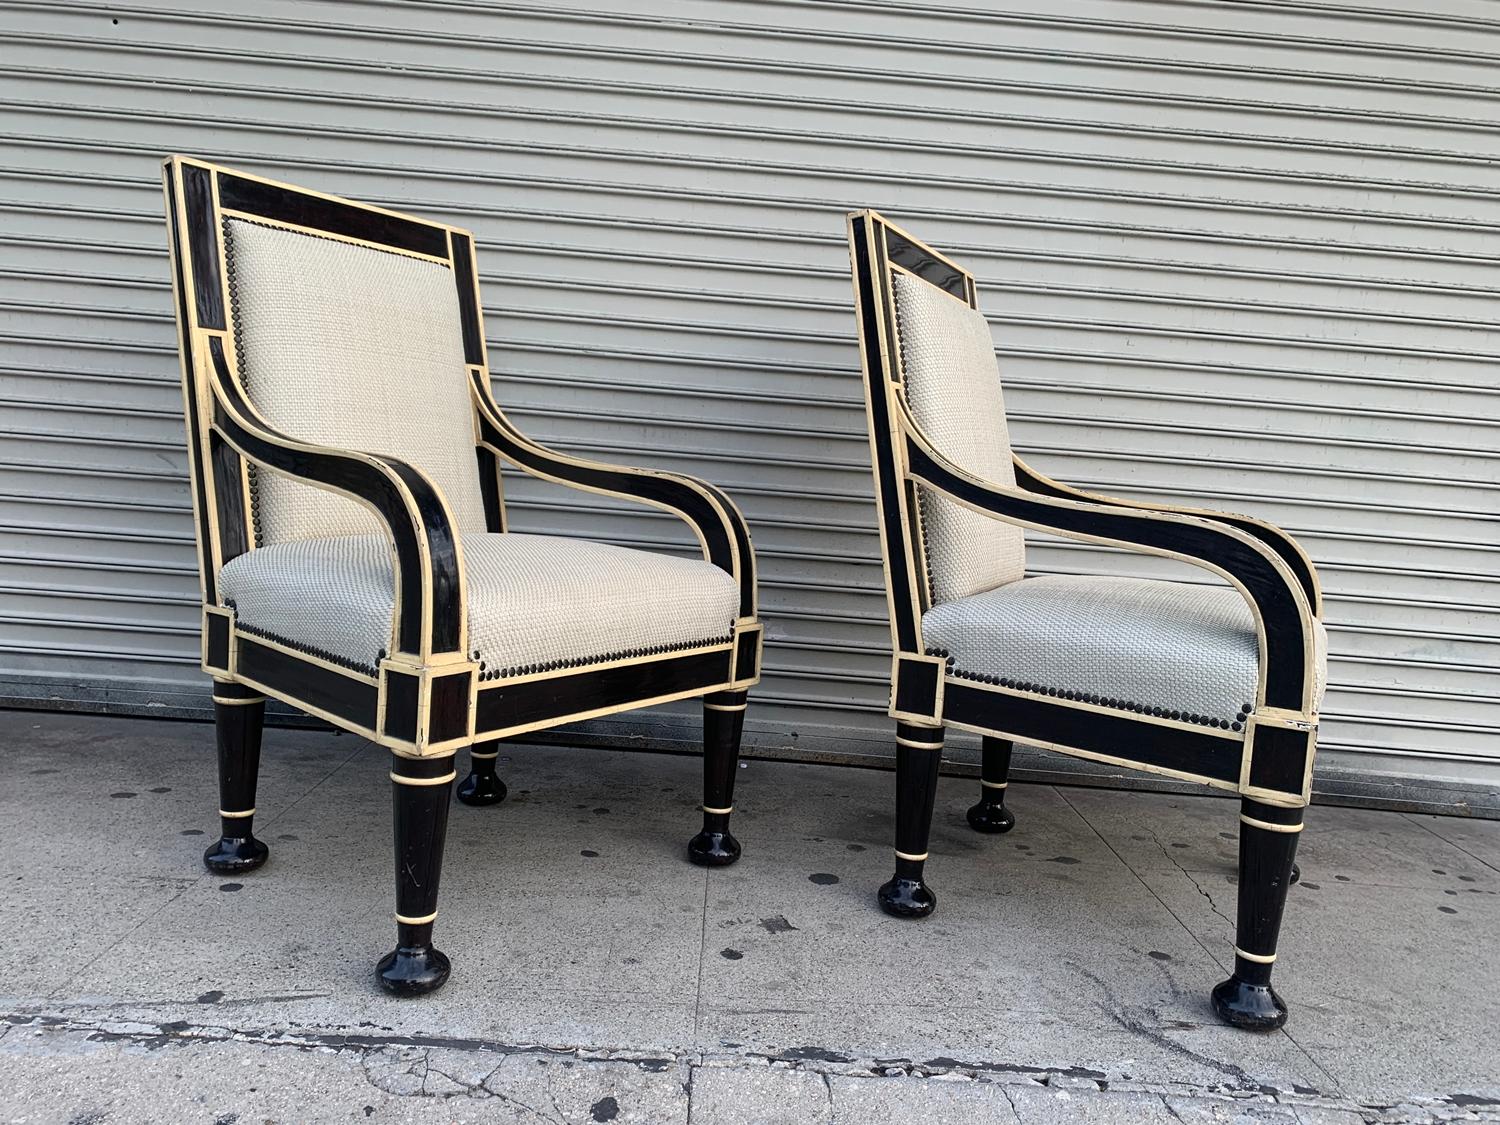 Beautiful pair of armchairs custom designed and built for a private client in Los Angeles.

The chairs are beautifully crafted and well designed, beautiful comination of colors having a crackle finish over the wood and a handwoven leather seat and